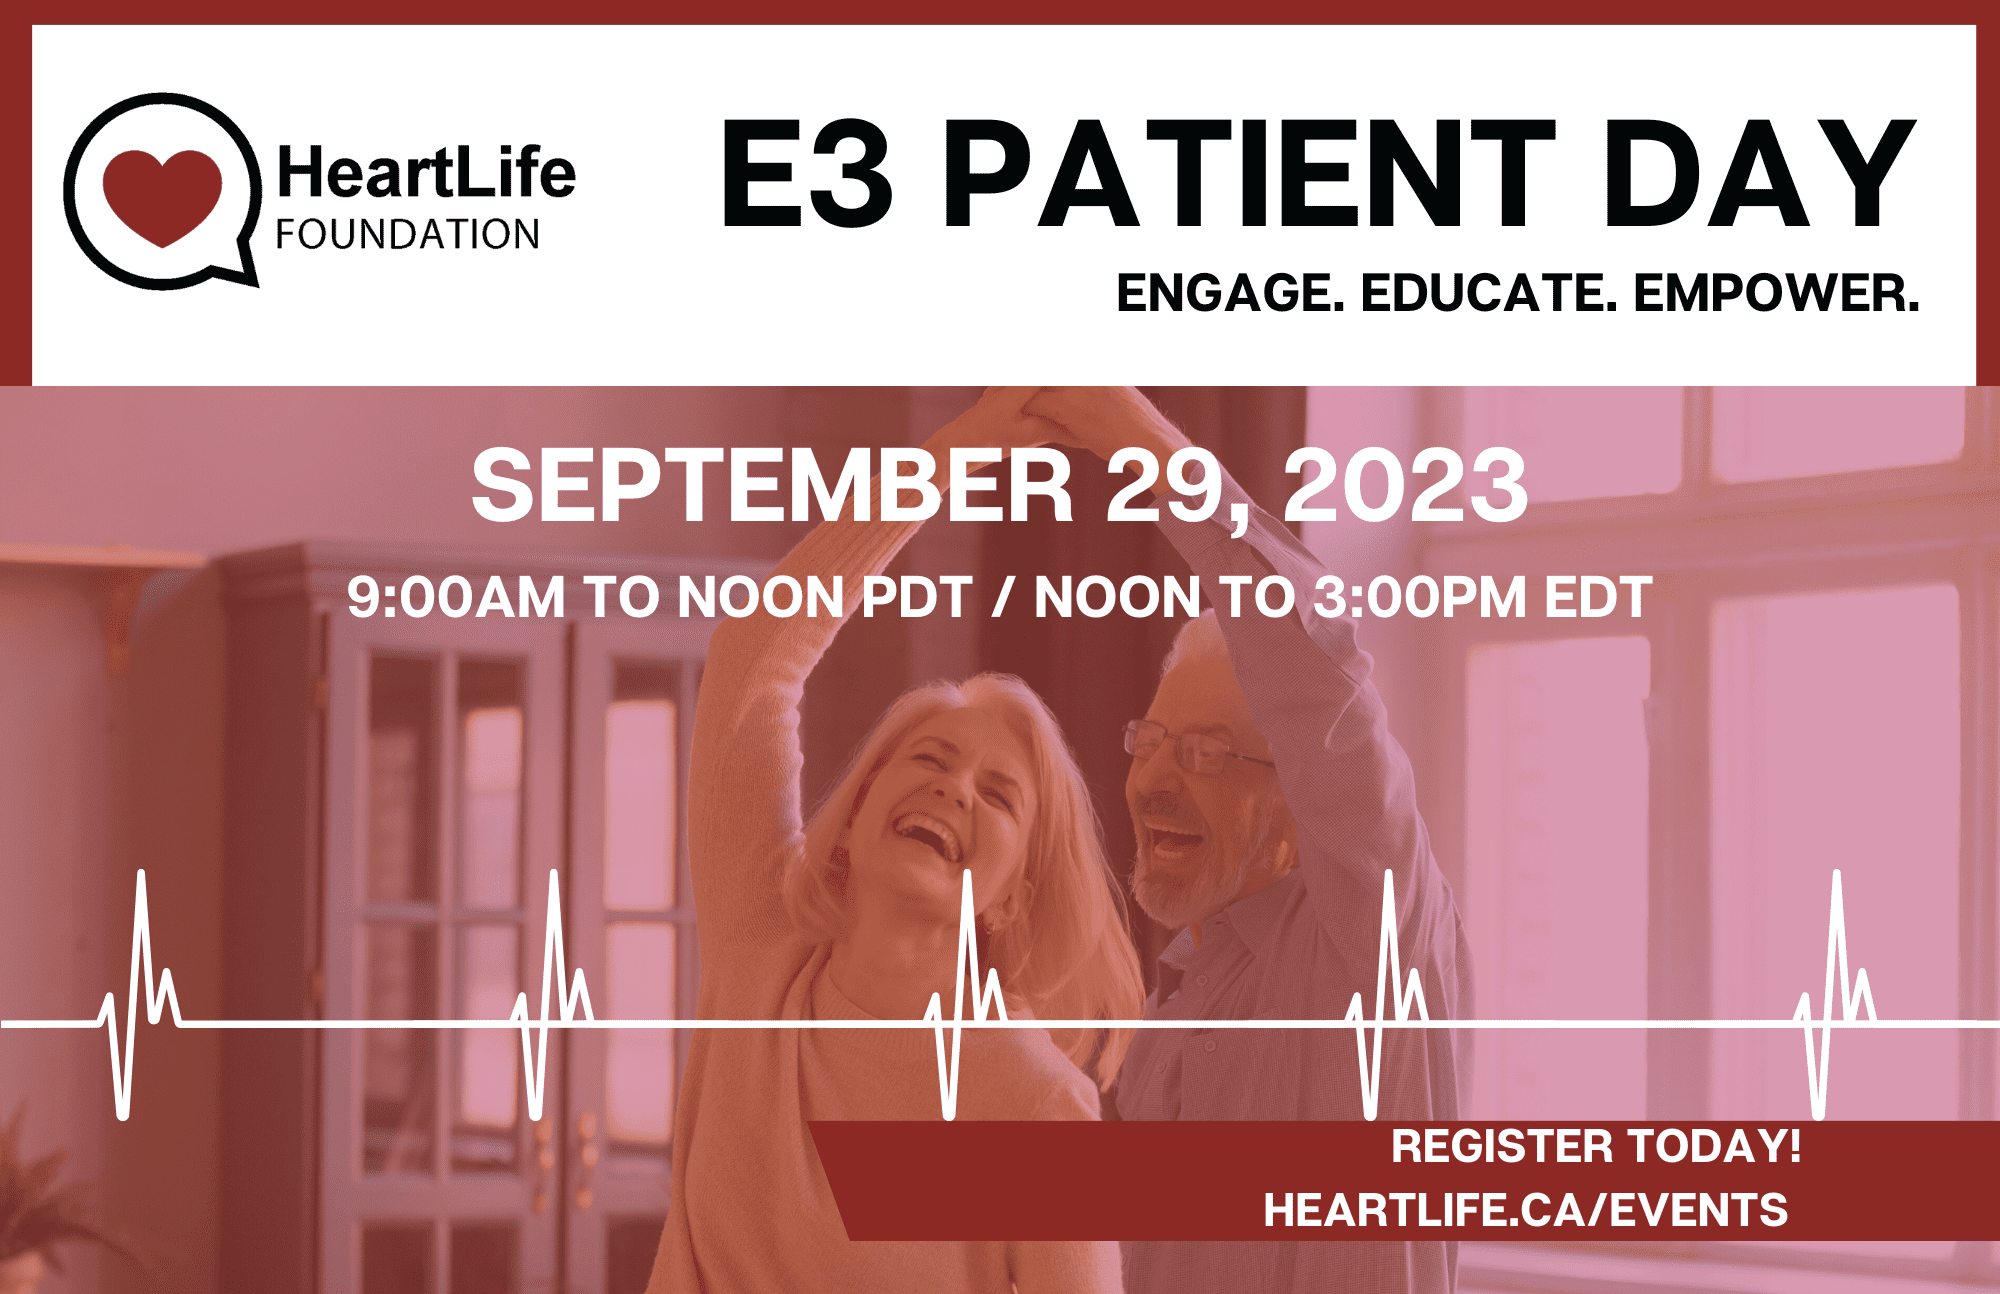 HeartLife E3 Patient Day - September 29, 2023